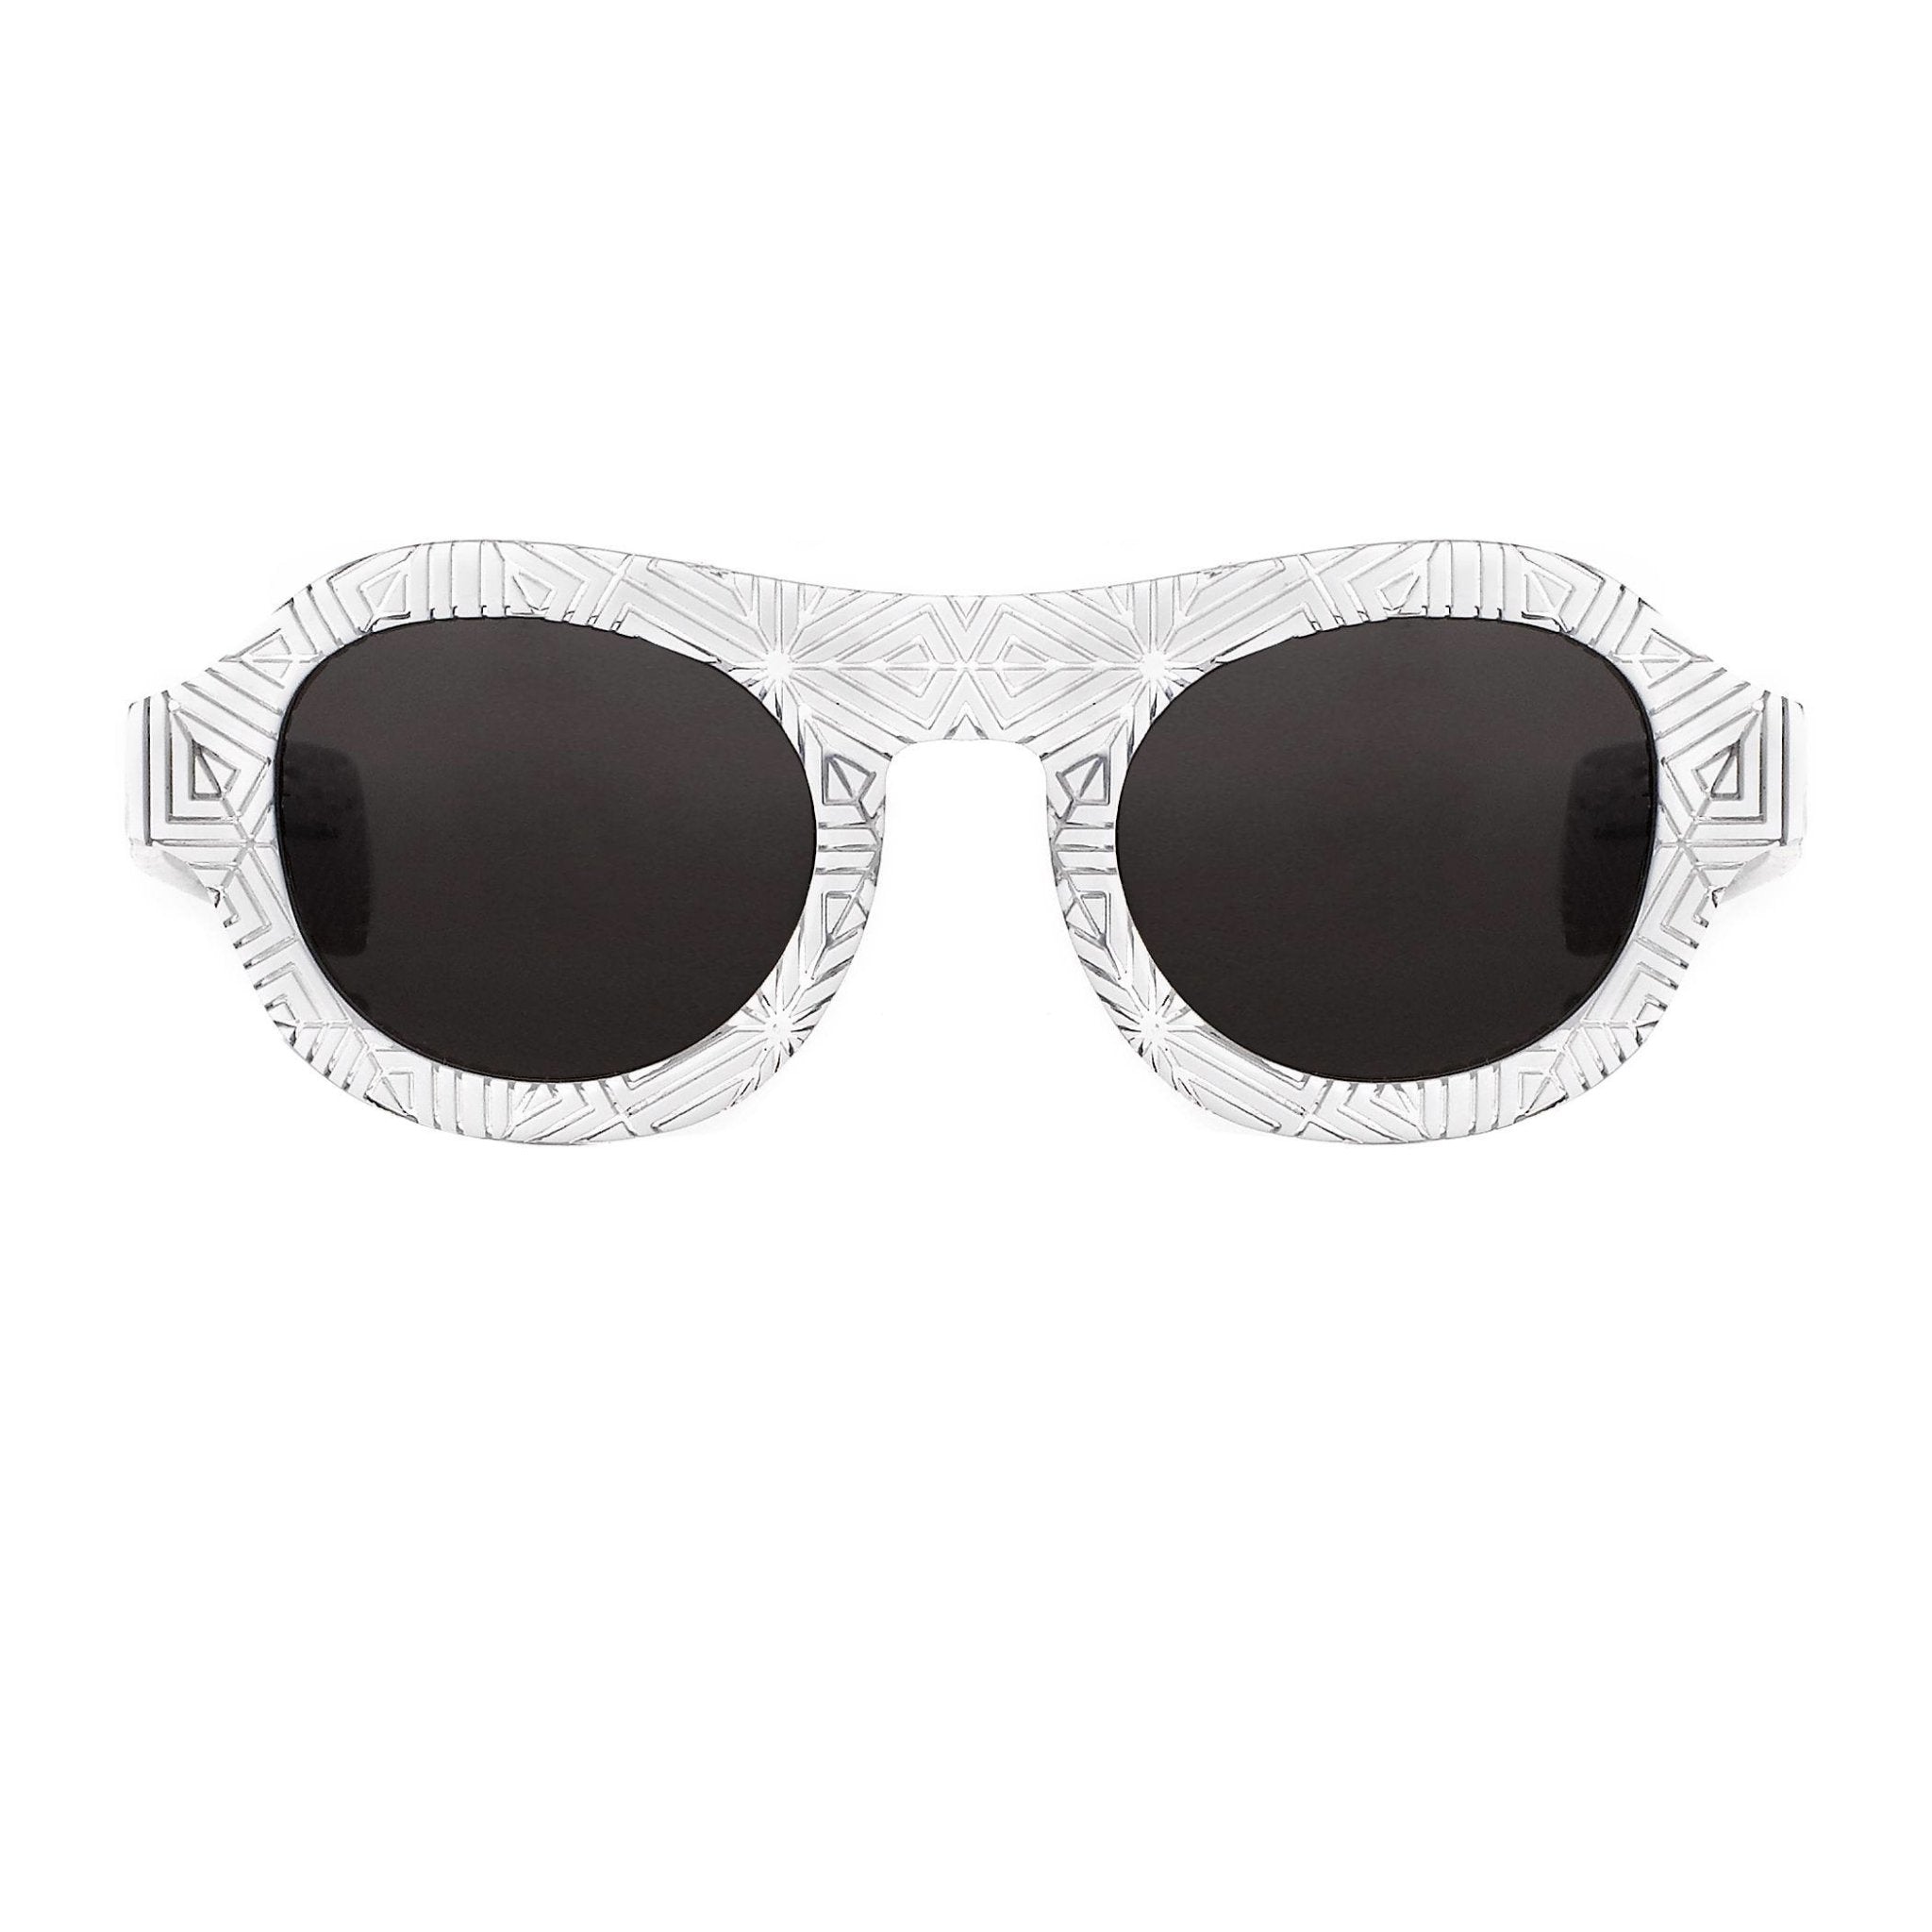 David David Sunglasses Oval Solid White Crystal With Dark Grey Lenses Category 3 9DAVID1C2WHITE - Watches & Crystals